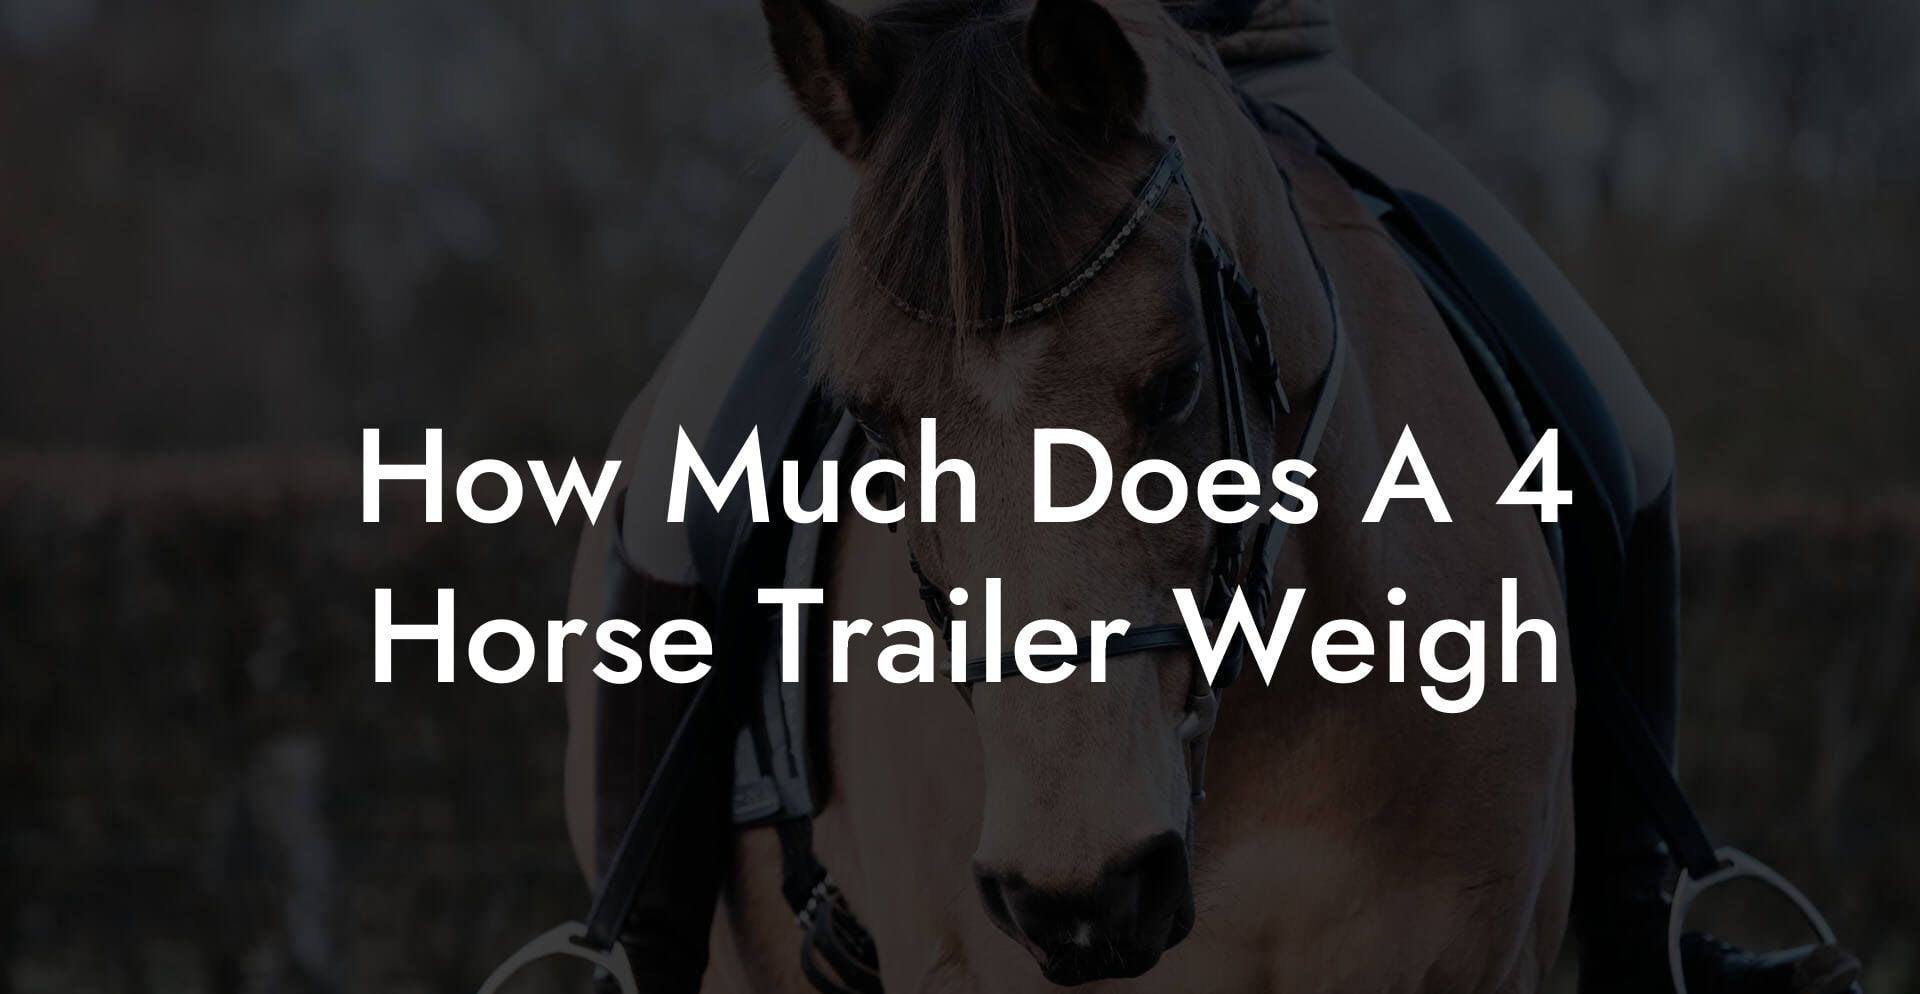 How Much Does A 4 Horse Trailer Weigh